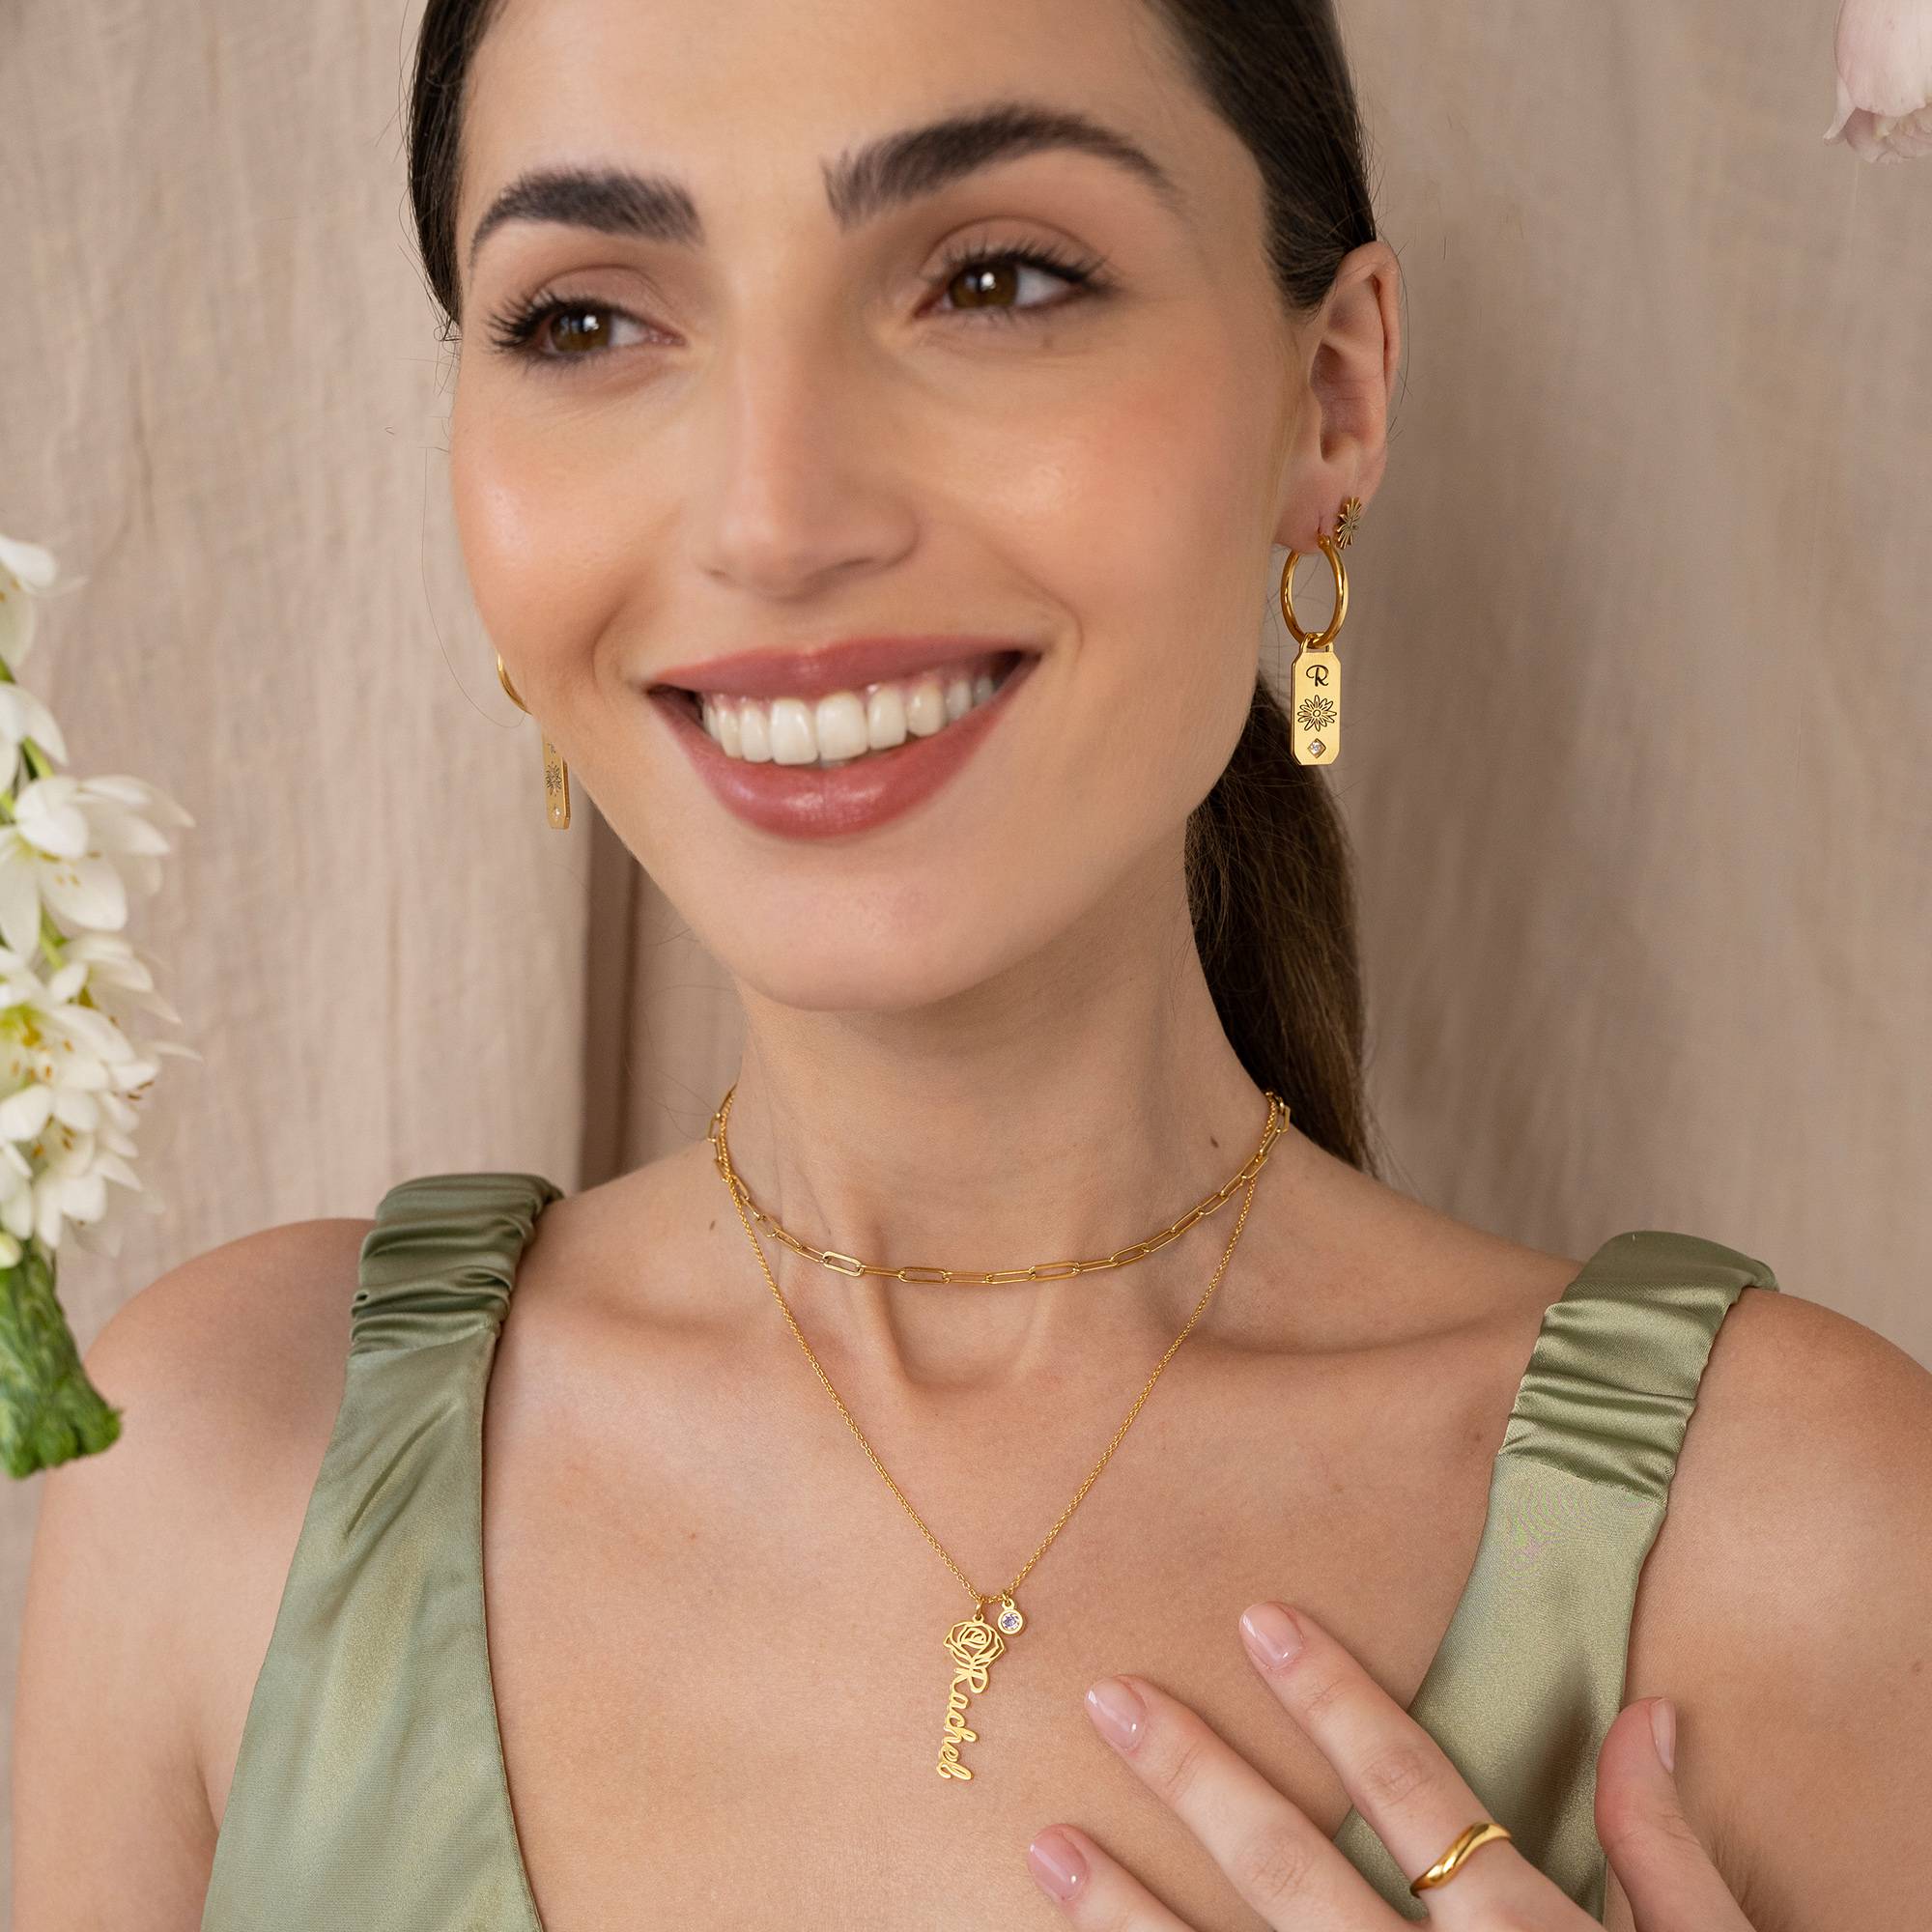 Blooming Birth Flower Name Necklace with Birthstone in 18K Gold Plating-4 product photo